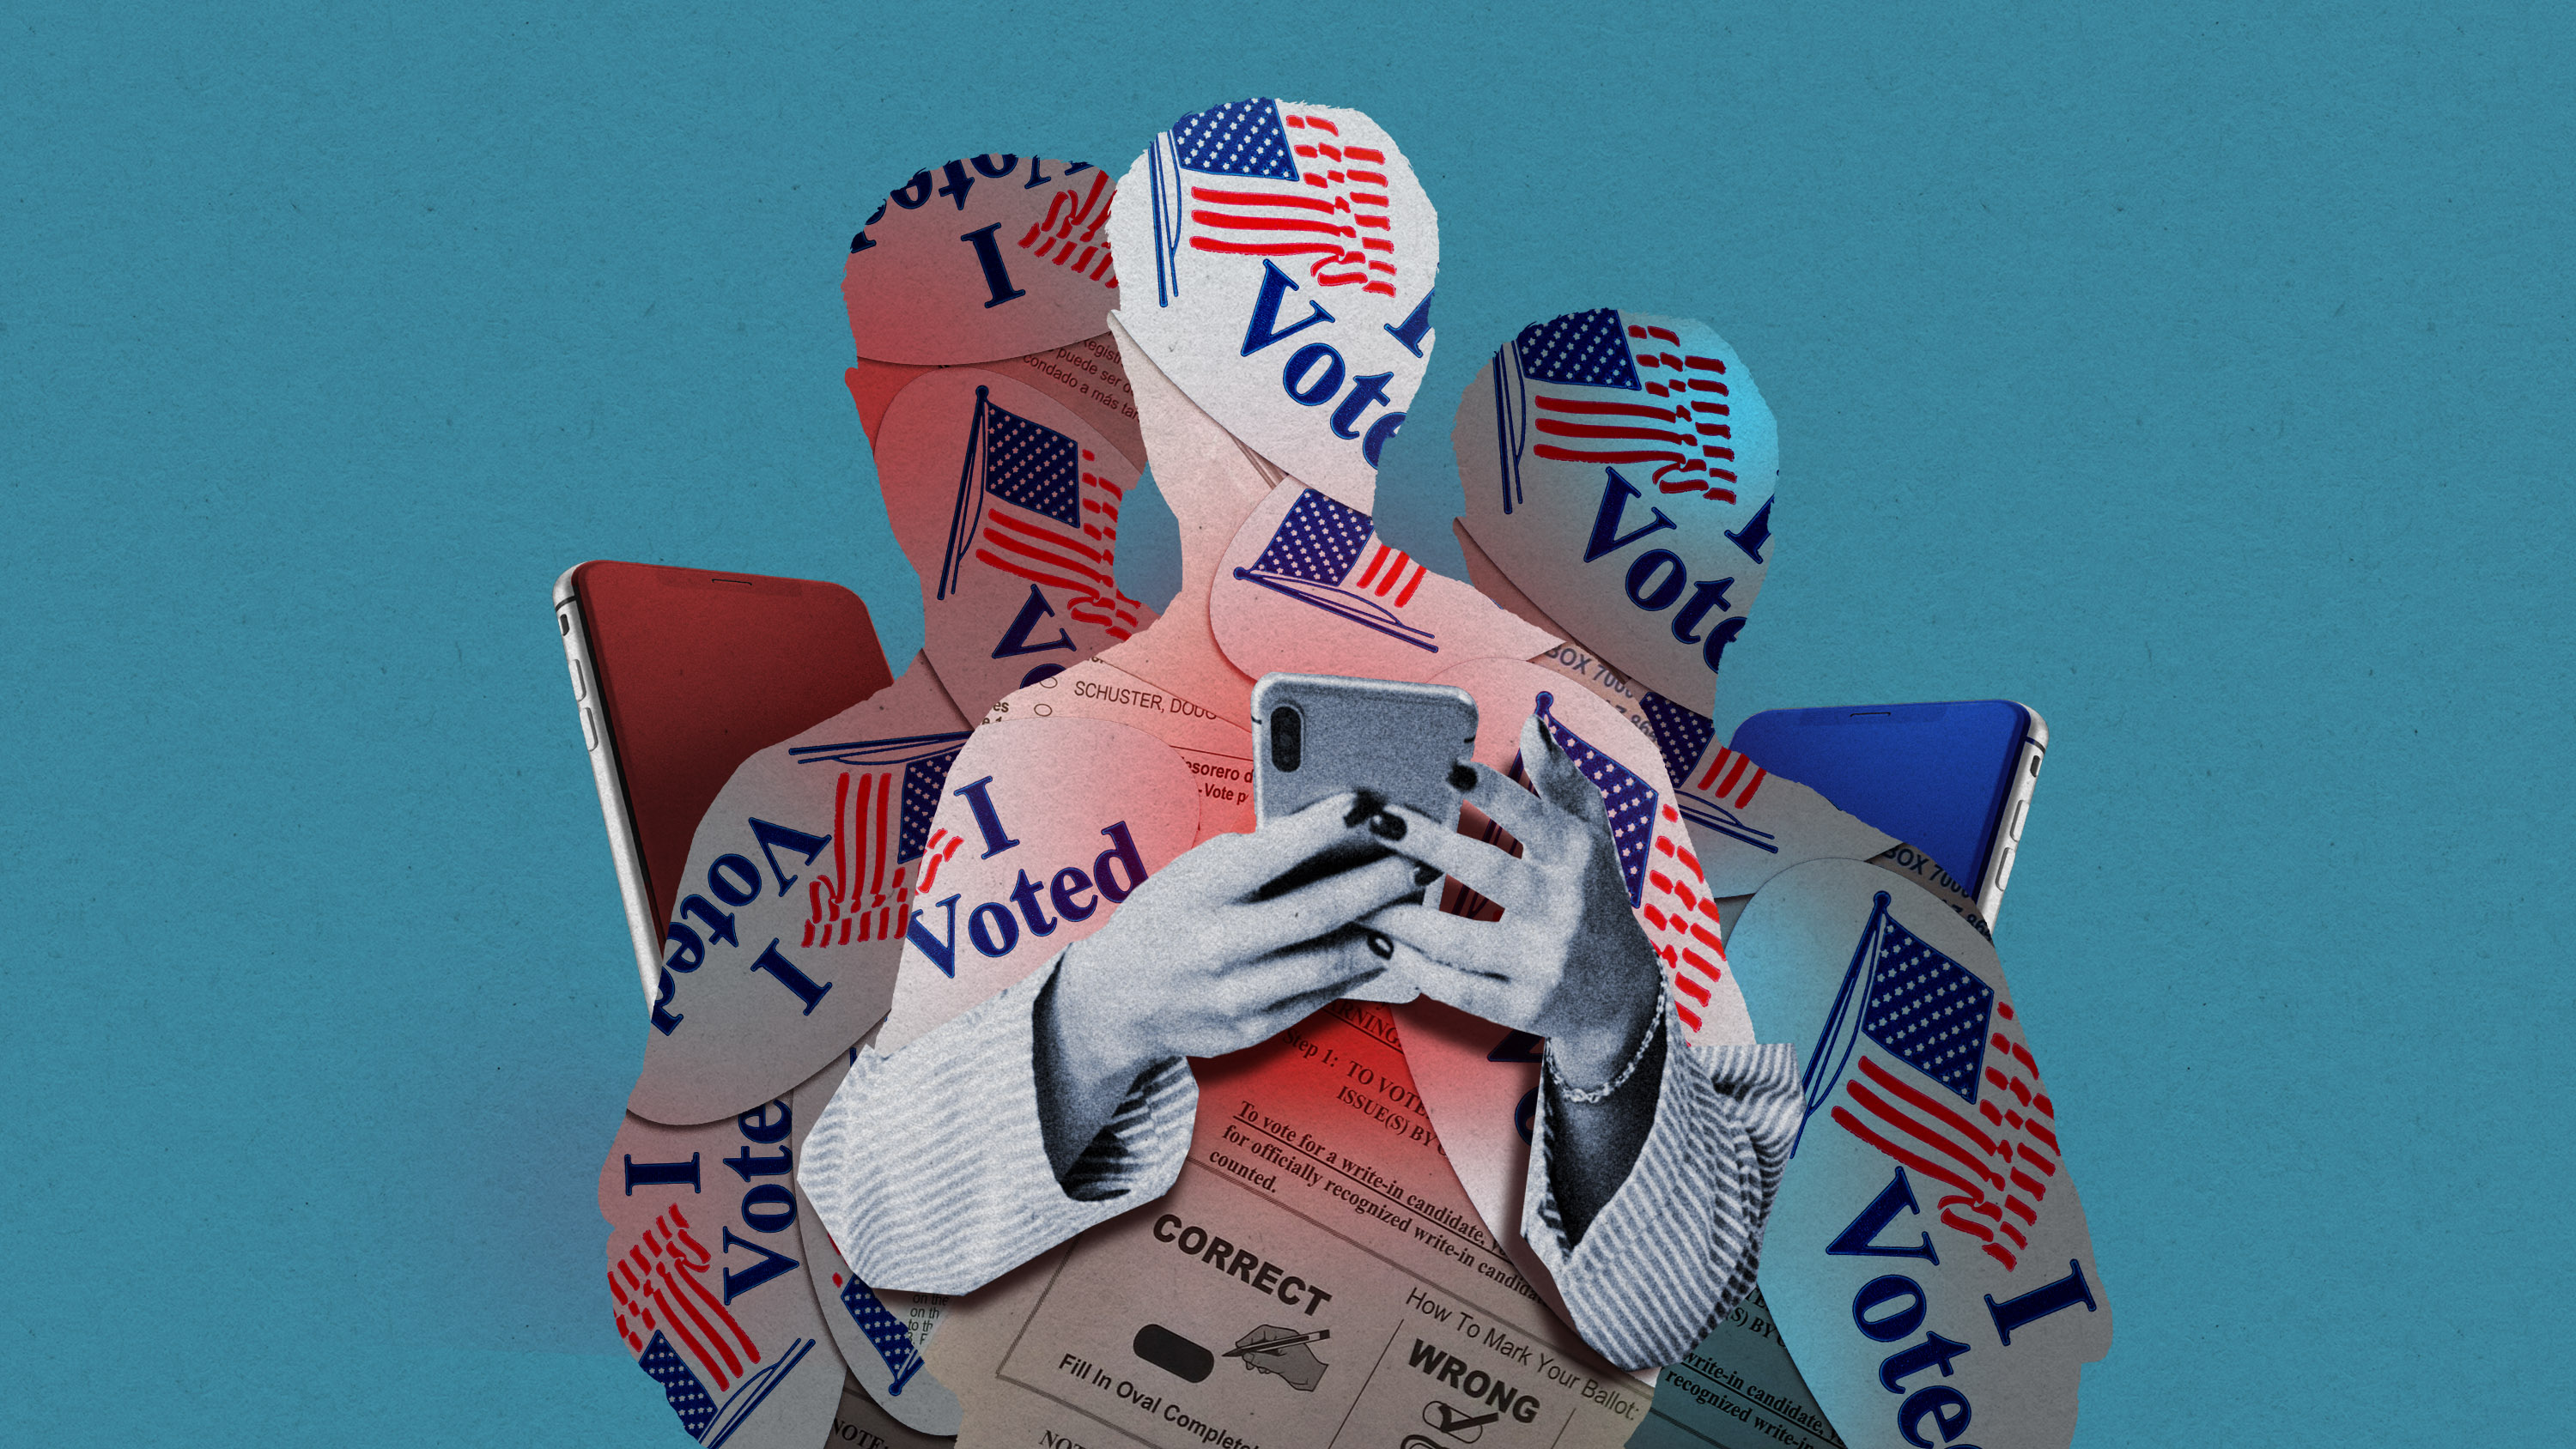 three figures covered in "I Voted" stickers lookat their phones which glow blue and red